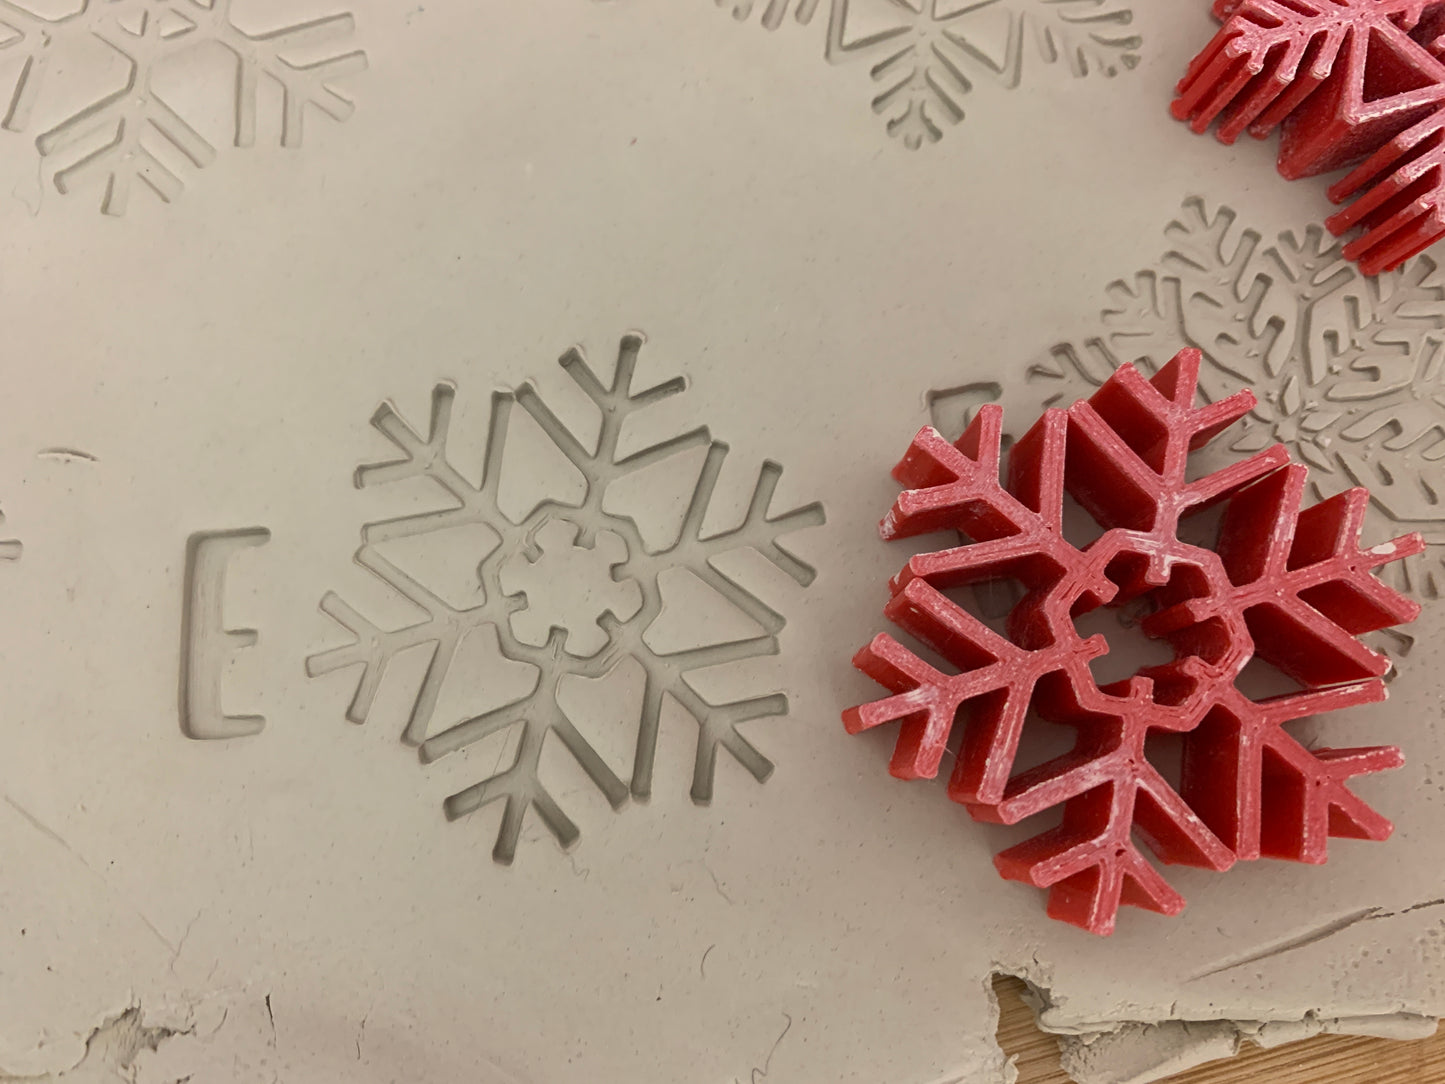 Pottery Stamp, Snowflake design, Each or Set - multiple sizes